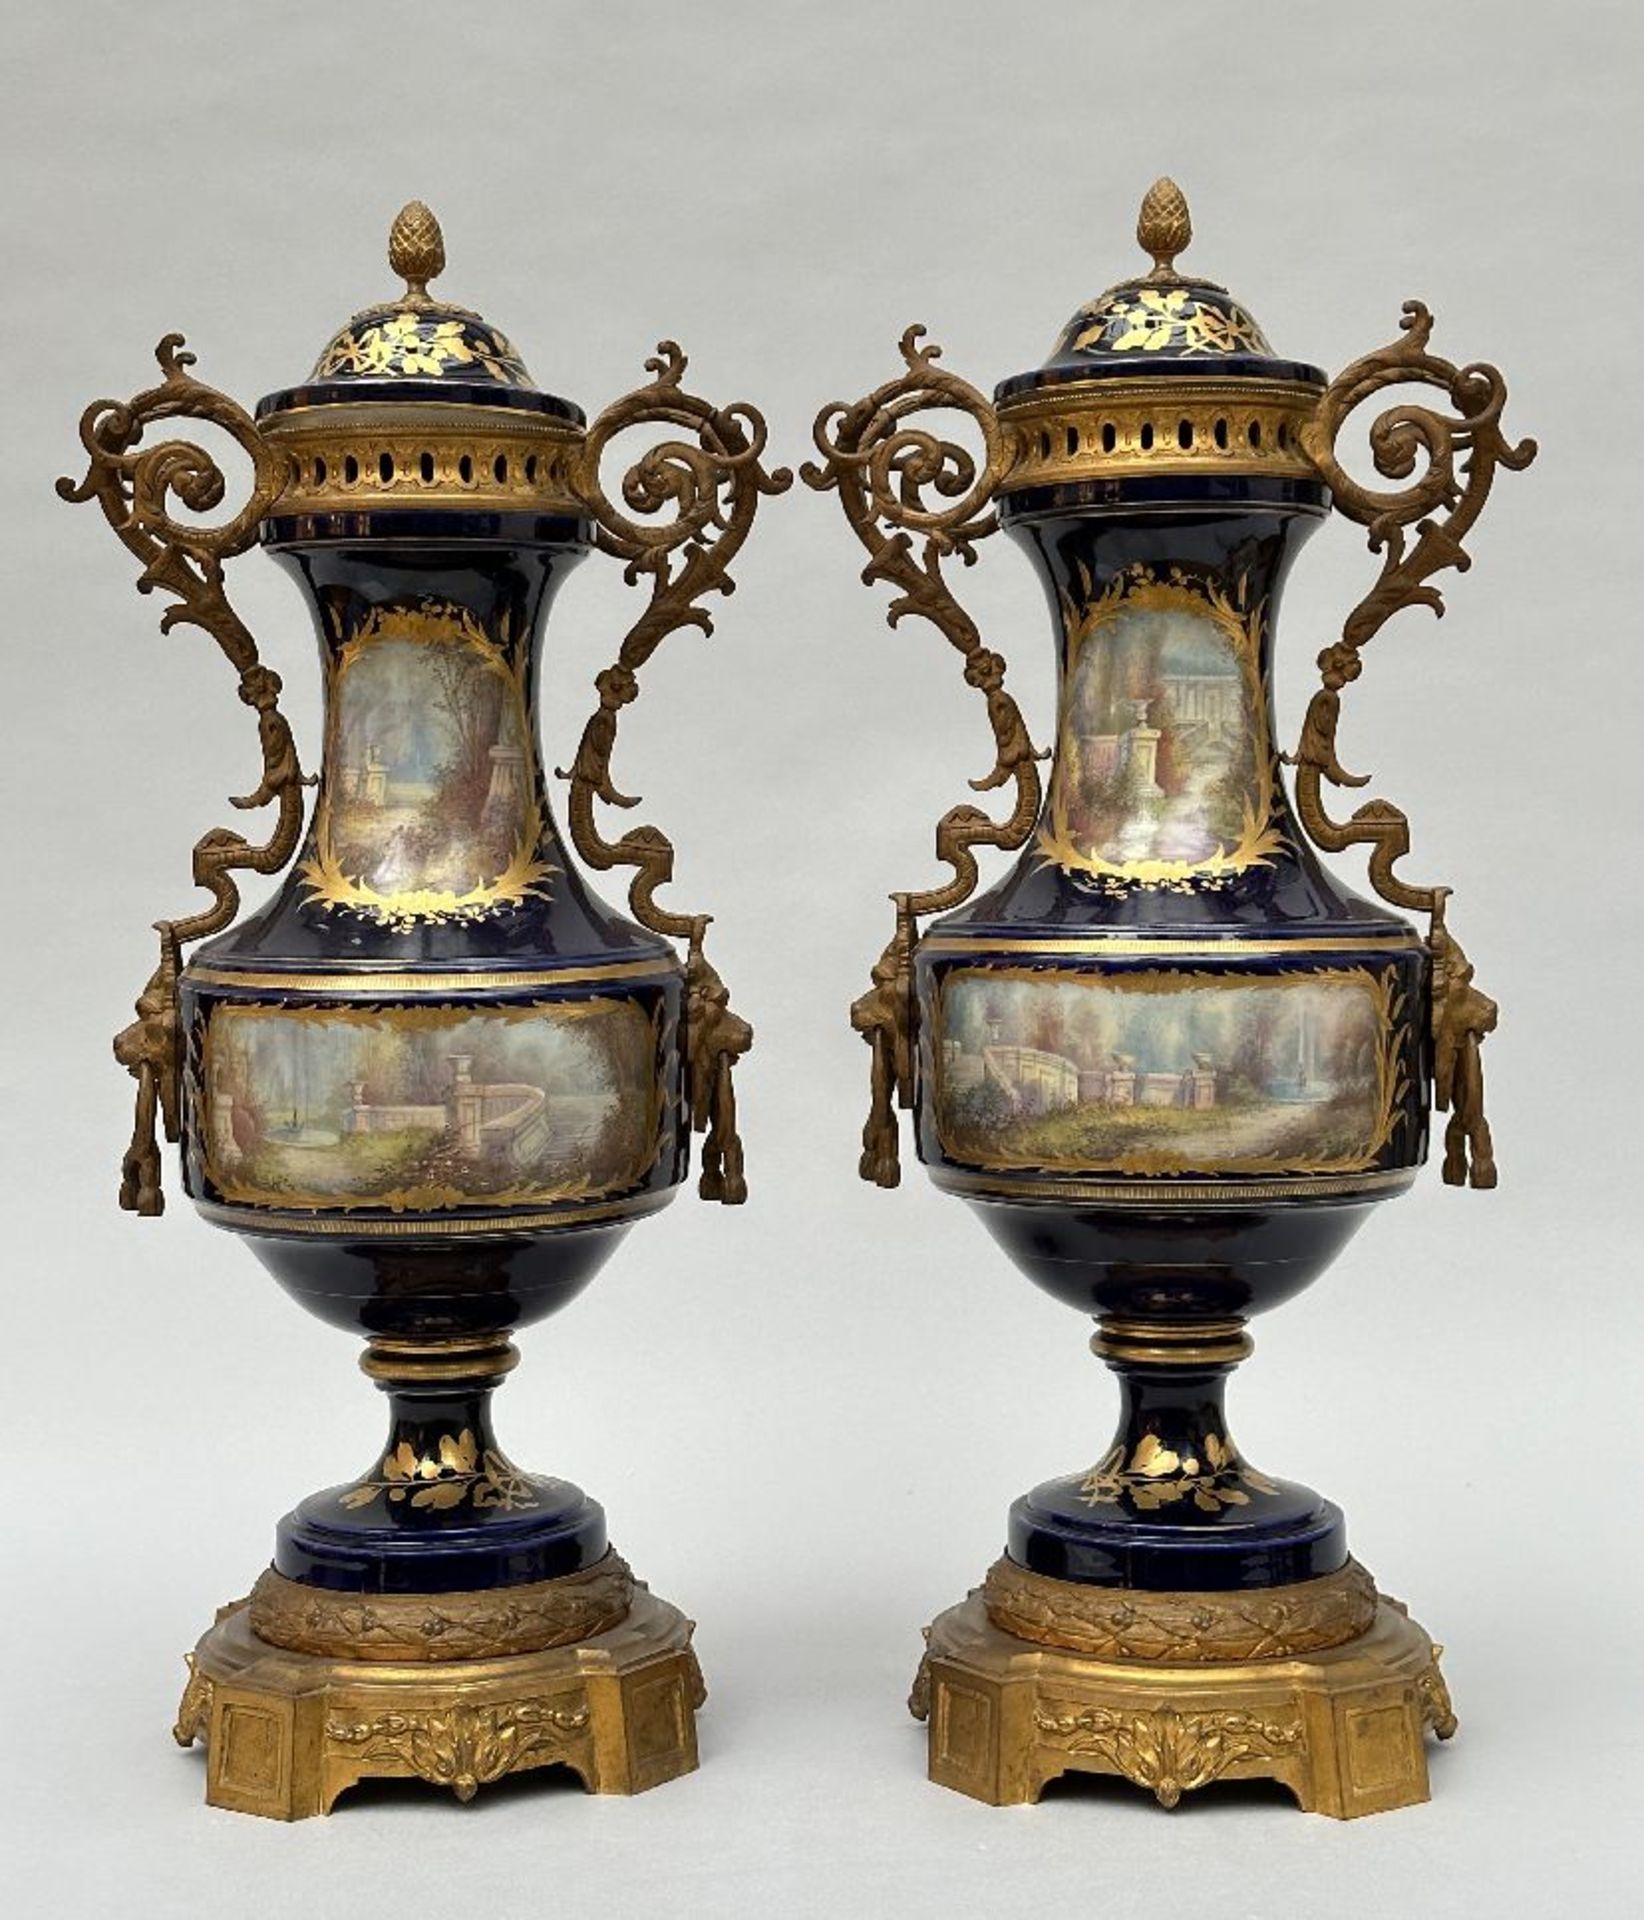 A pair of Sèvres porcelain vases with gilt bronze mounts, 19th century (*) - Image 8 of 9